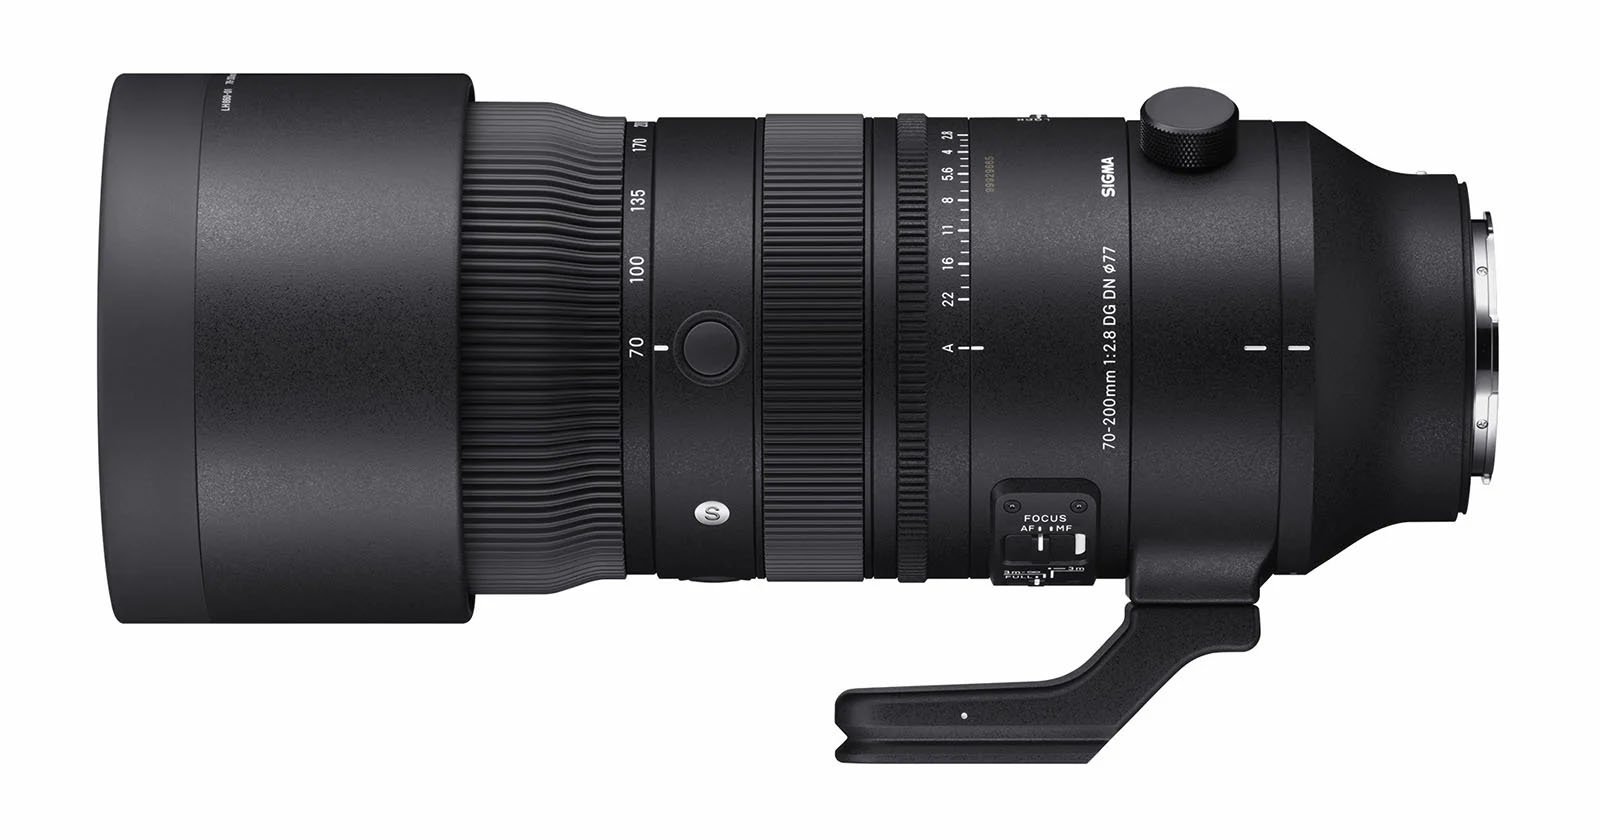 New Info About Sigmas Upcoming 70-200mm f/2.8 Mirrorless Lens